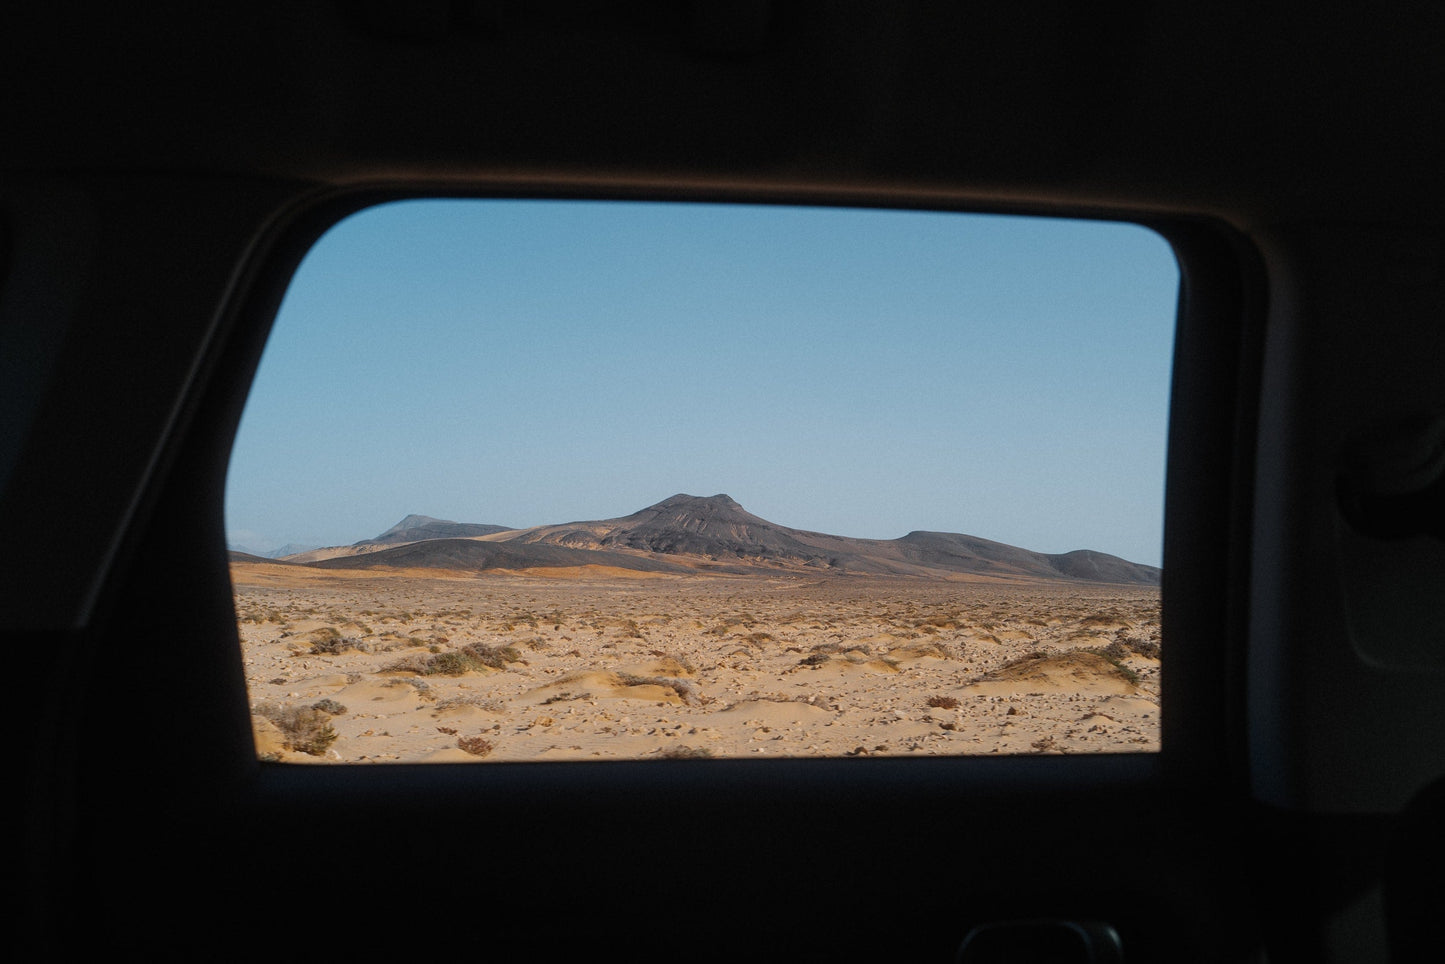 The artpiece 'Volcano' by Mikail Sahin shows a volcano in background, photographed from a car, with the window frame framing the volcano.